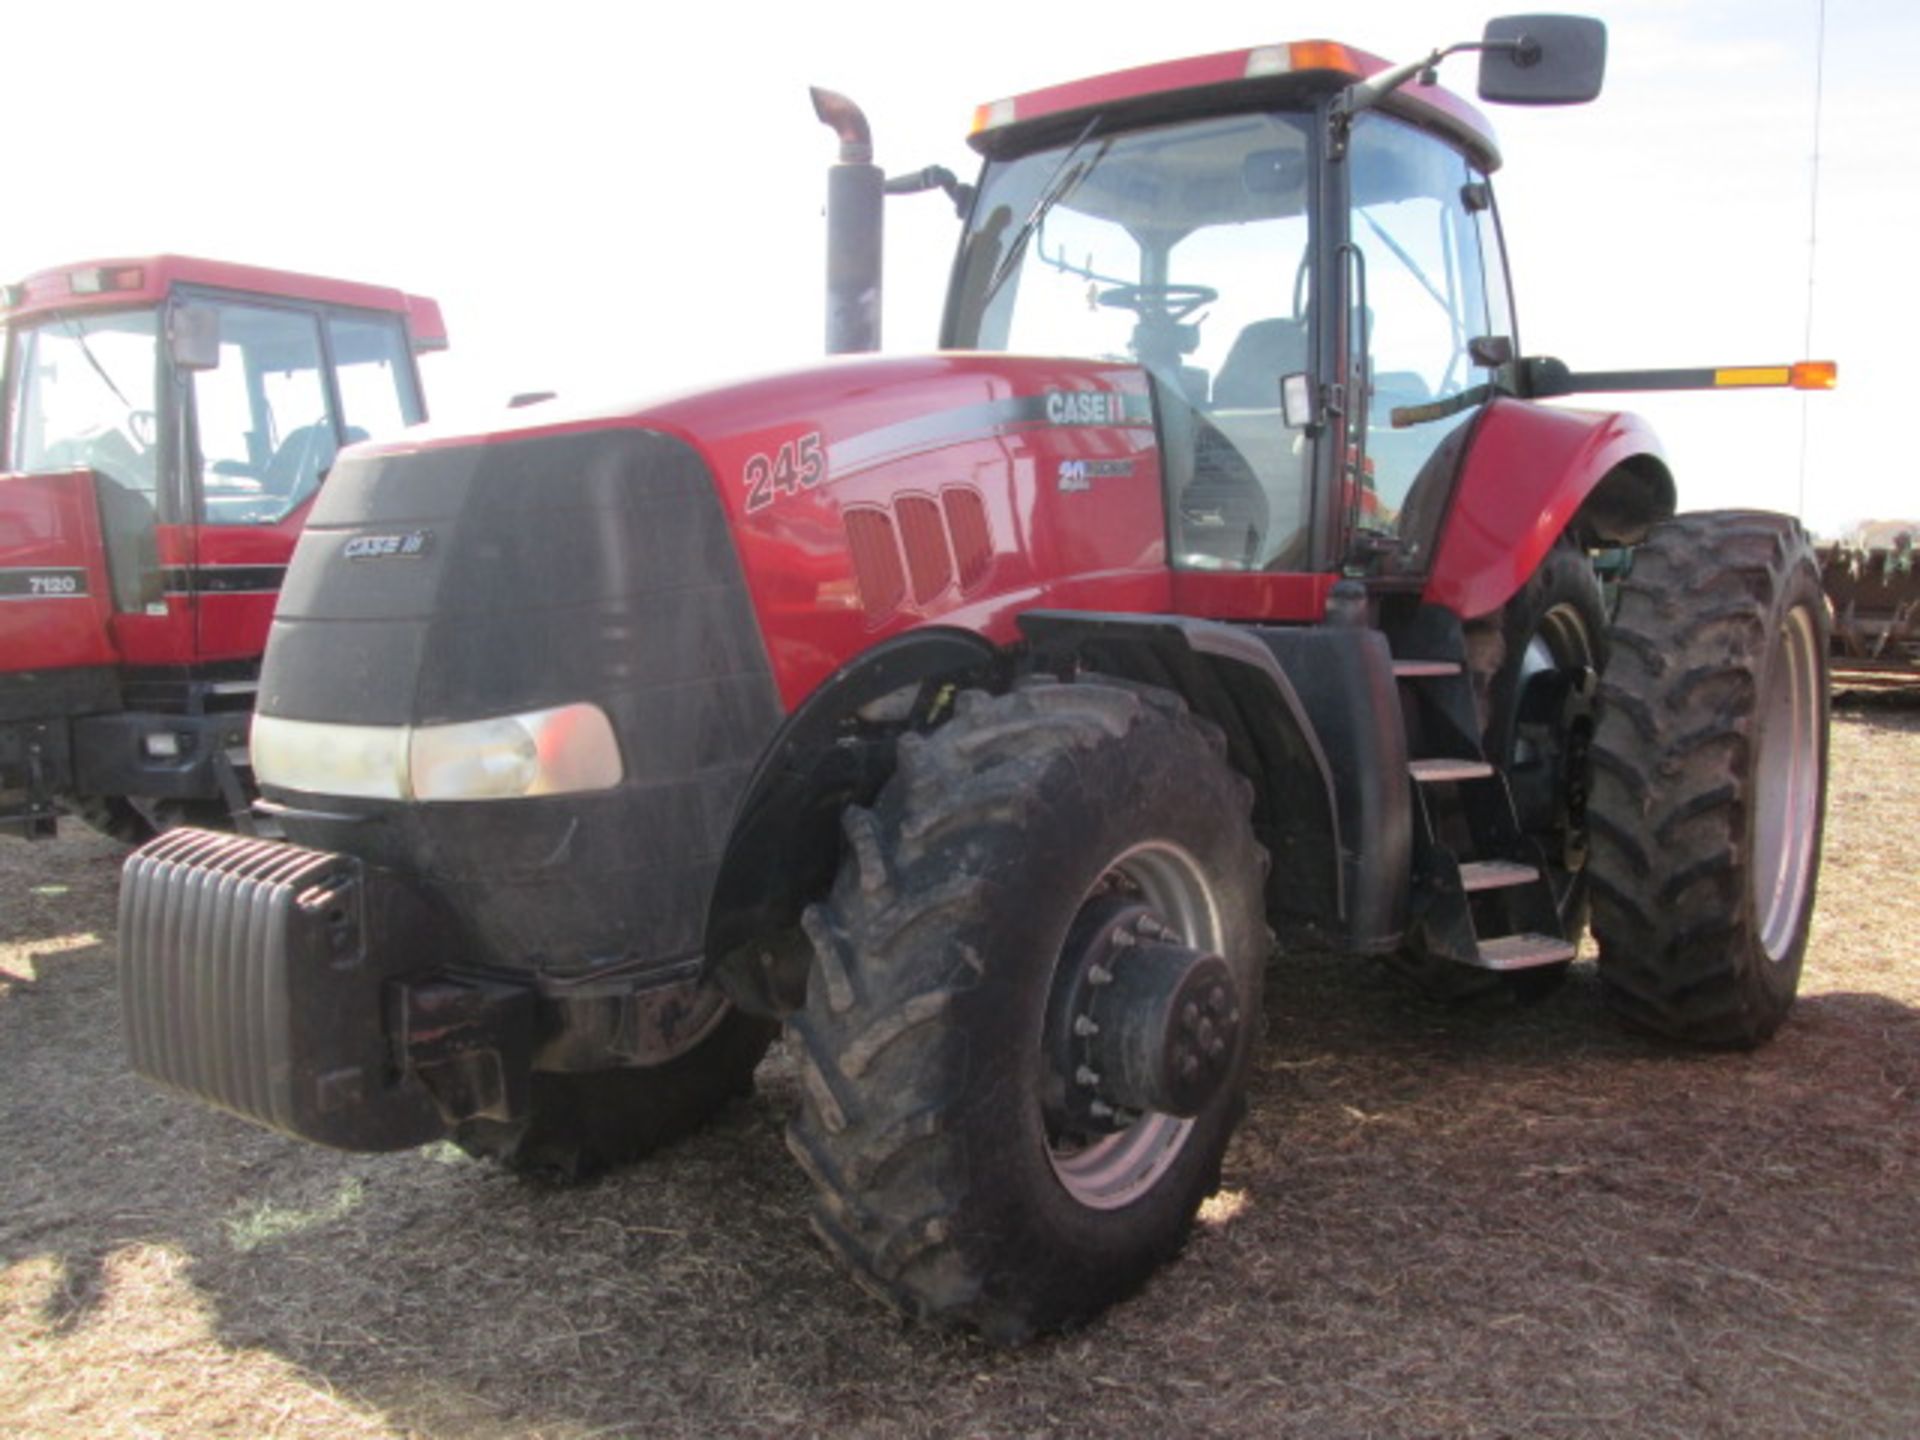 ’08 C-IH MAGNUM 245,480X46 DUALS, 4 HYDR, 3474 HRS - Image 2 of 18